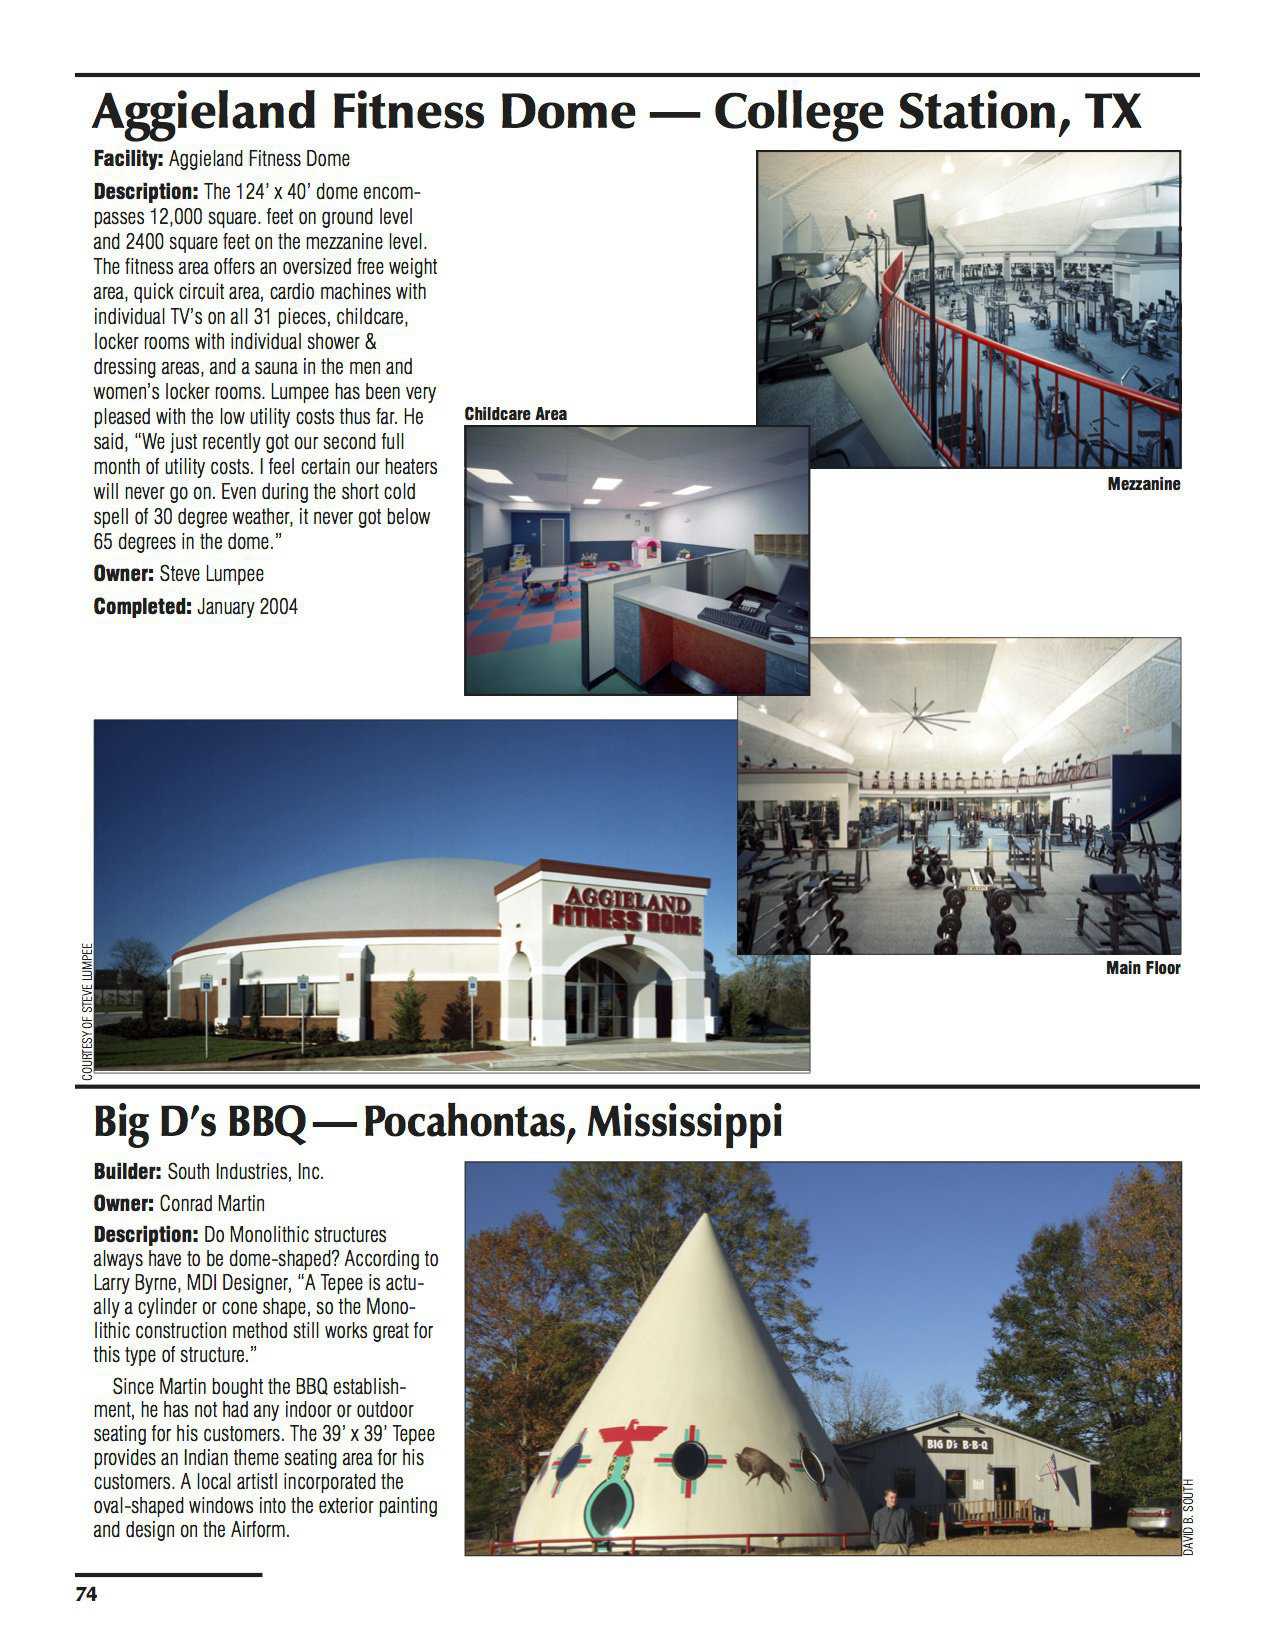 Sample pages – Aggieland Fitness Dome, College Station, Texas